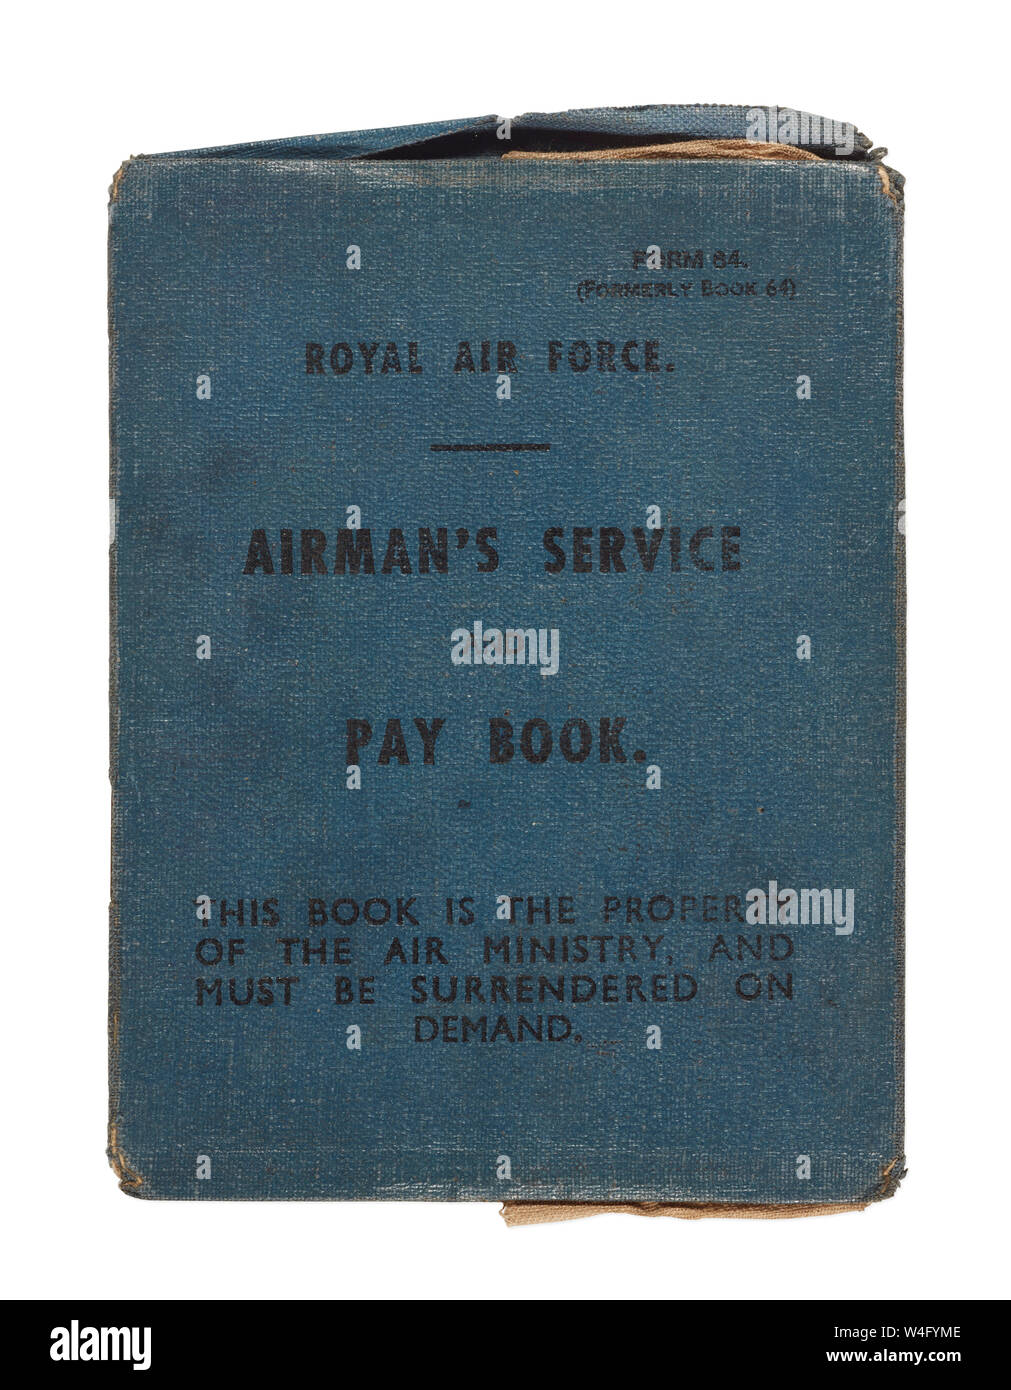 Cover of Airman's Service Pay Book for the RAF duding world war II belonging to R H Cooper Stock Photo